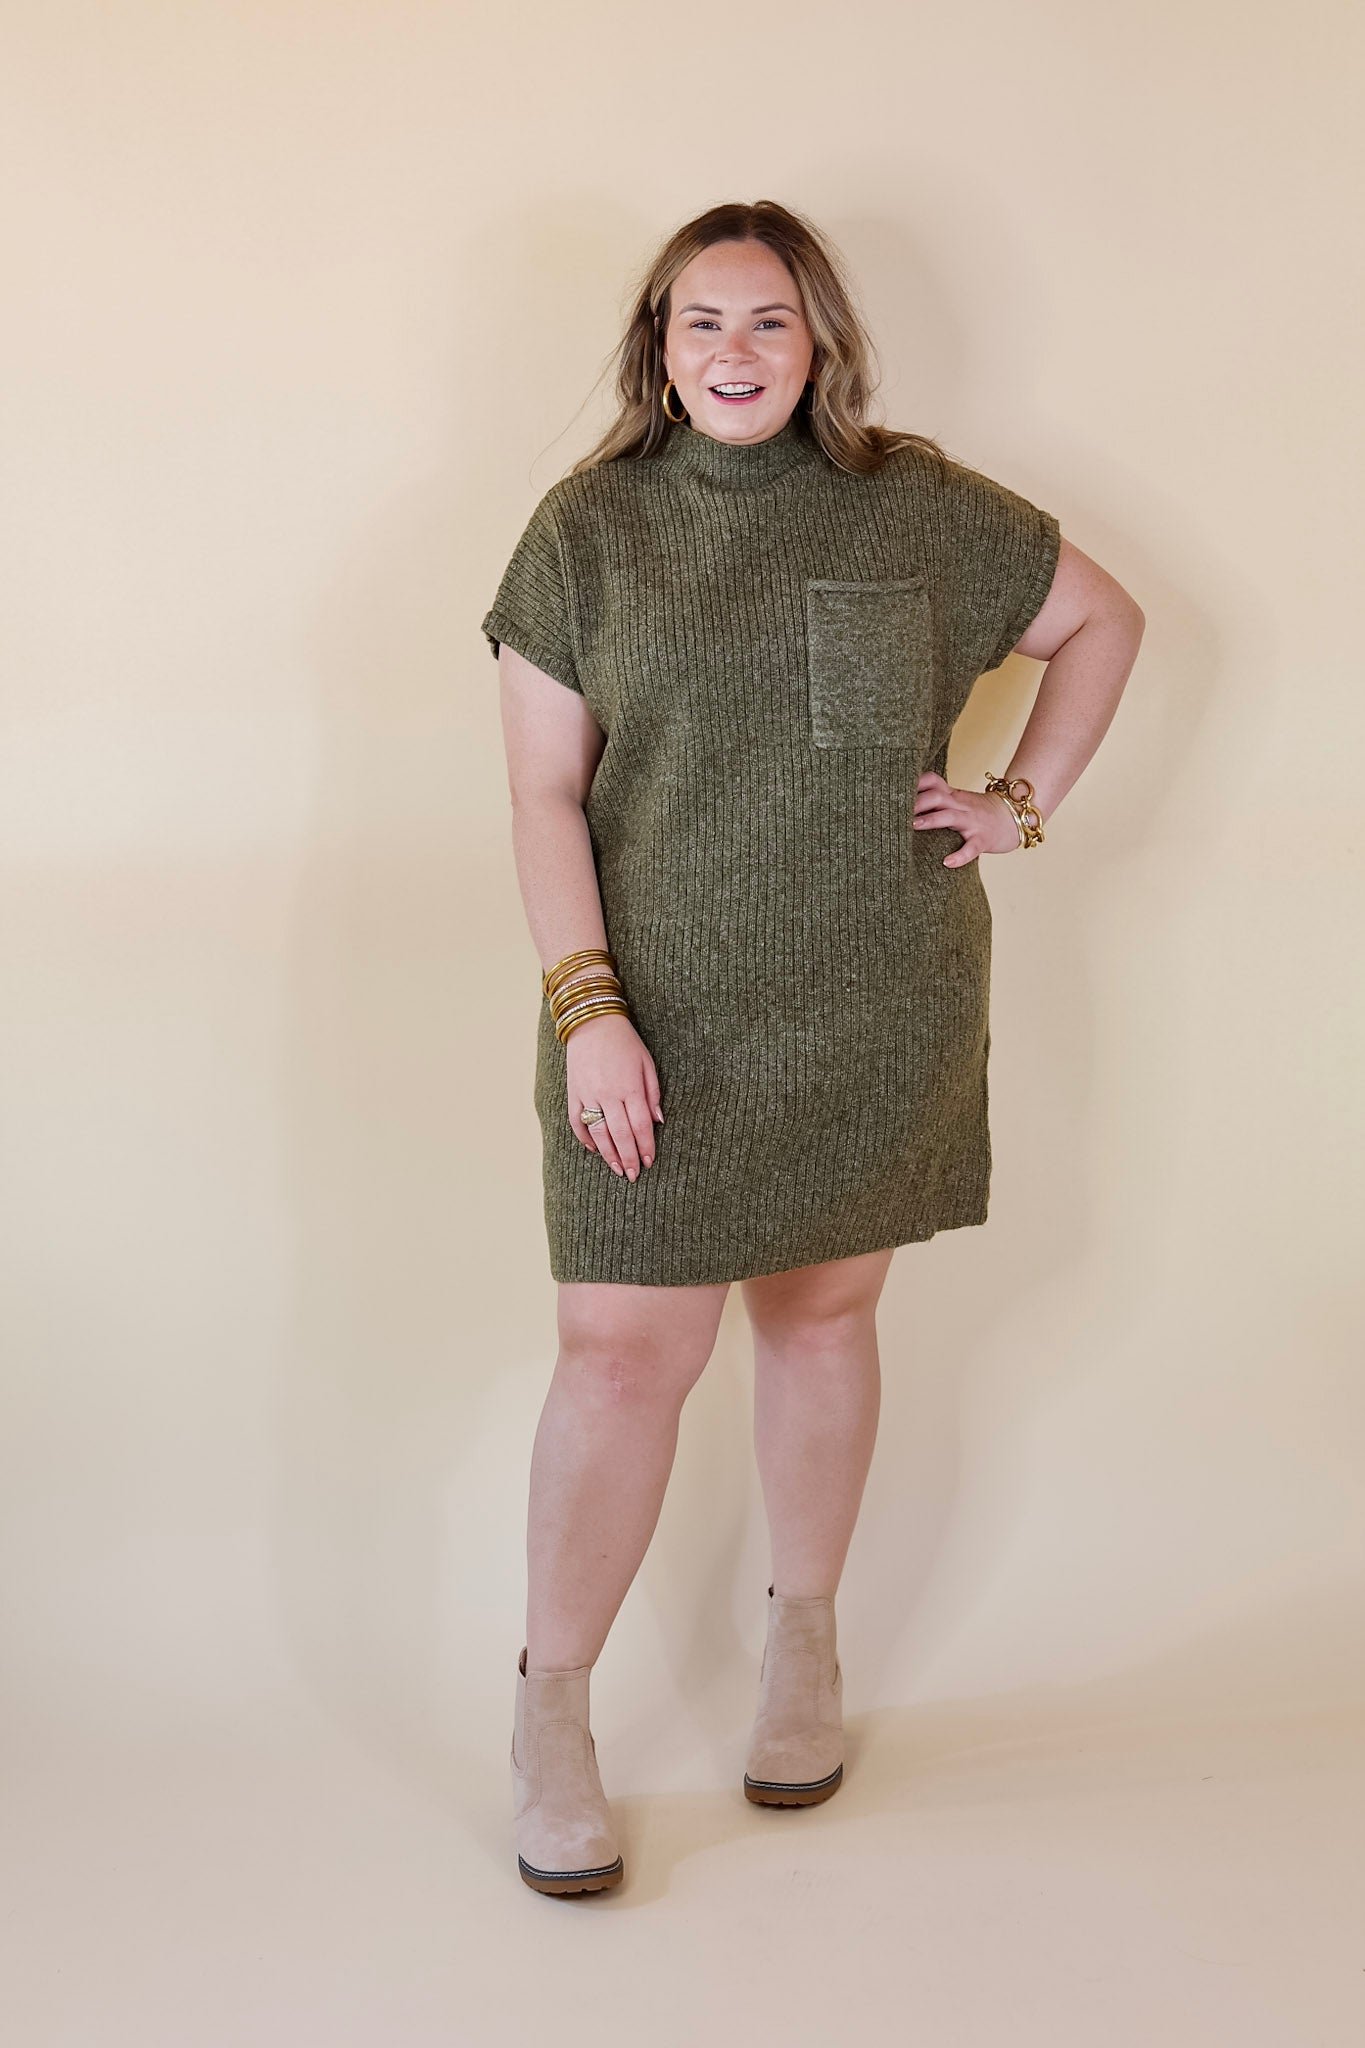 City Sights Cap Sleeve Sweater Dress in Olive Green - Giddy Up Glamour Boutique